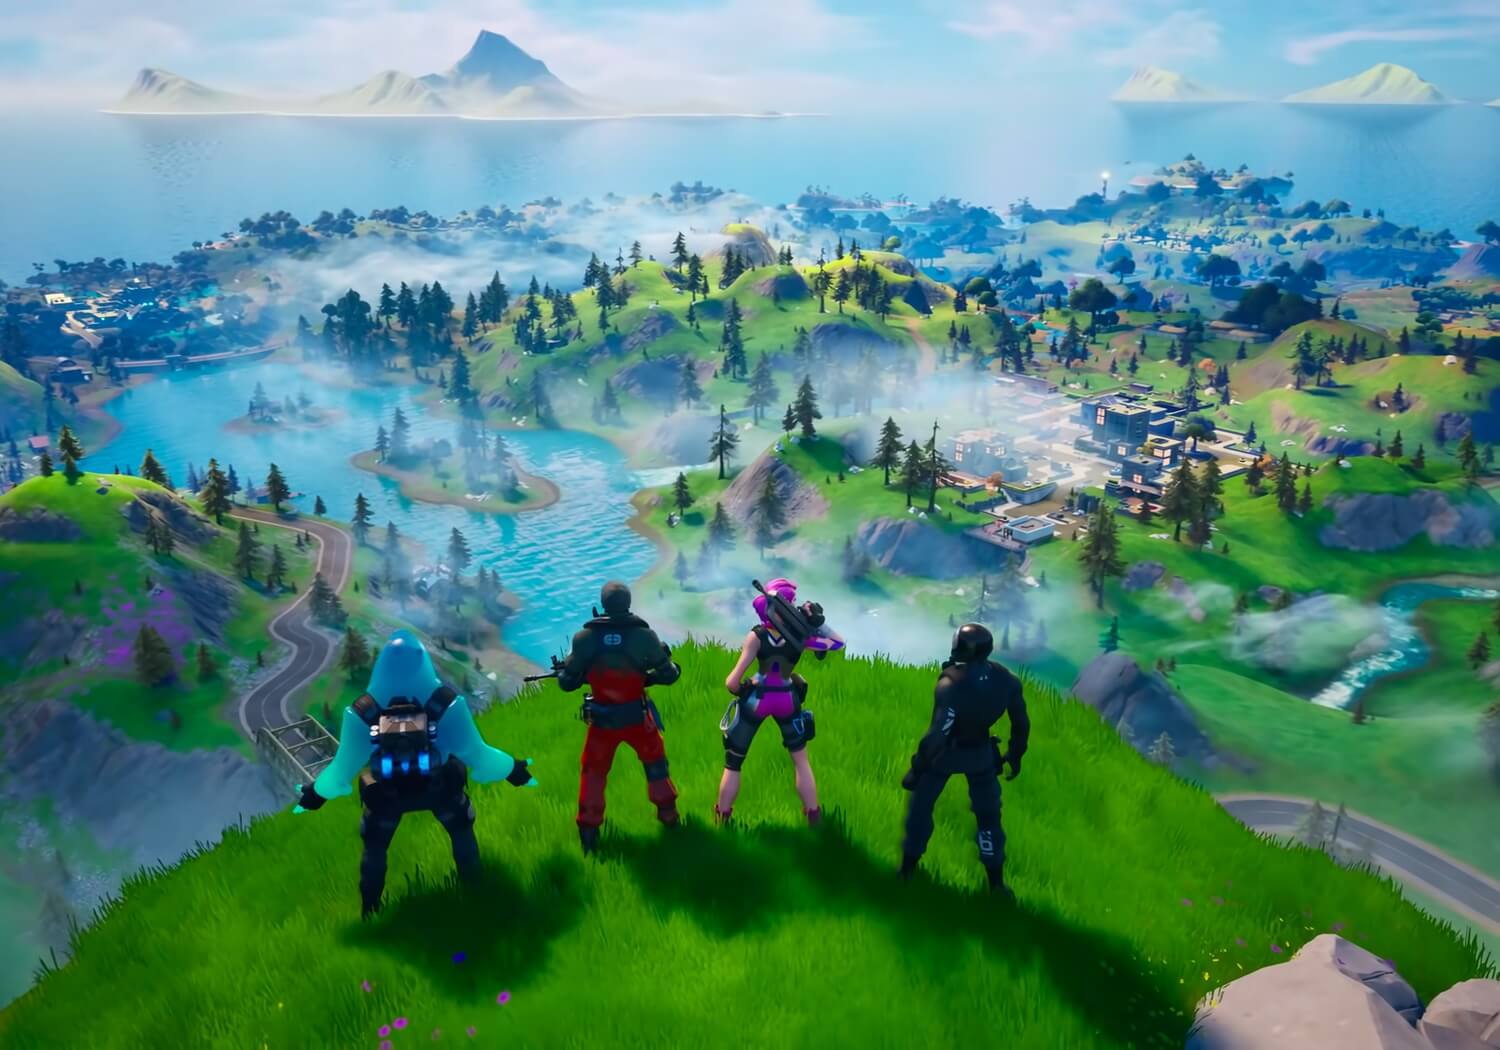 Epic Games job listing mentions Fortnite open-world survival game